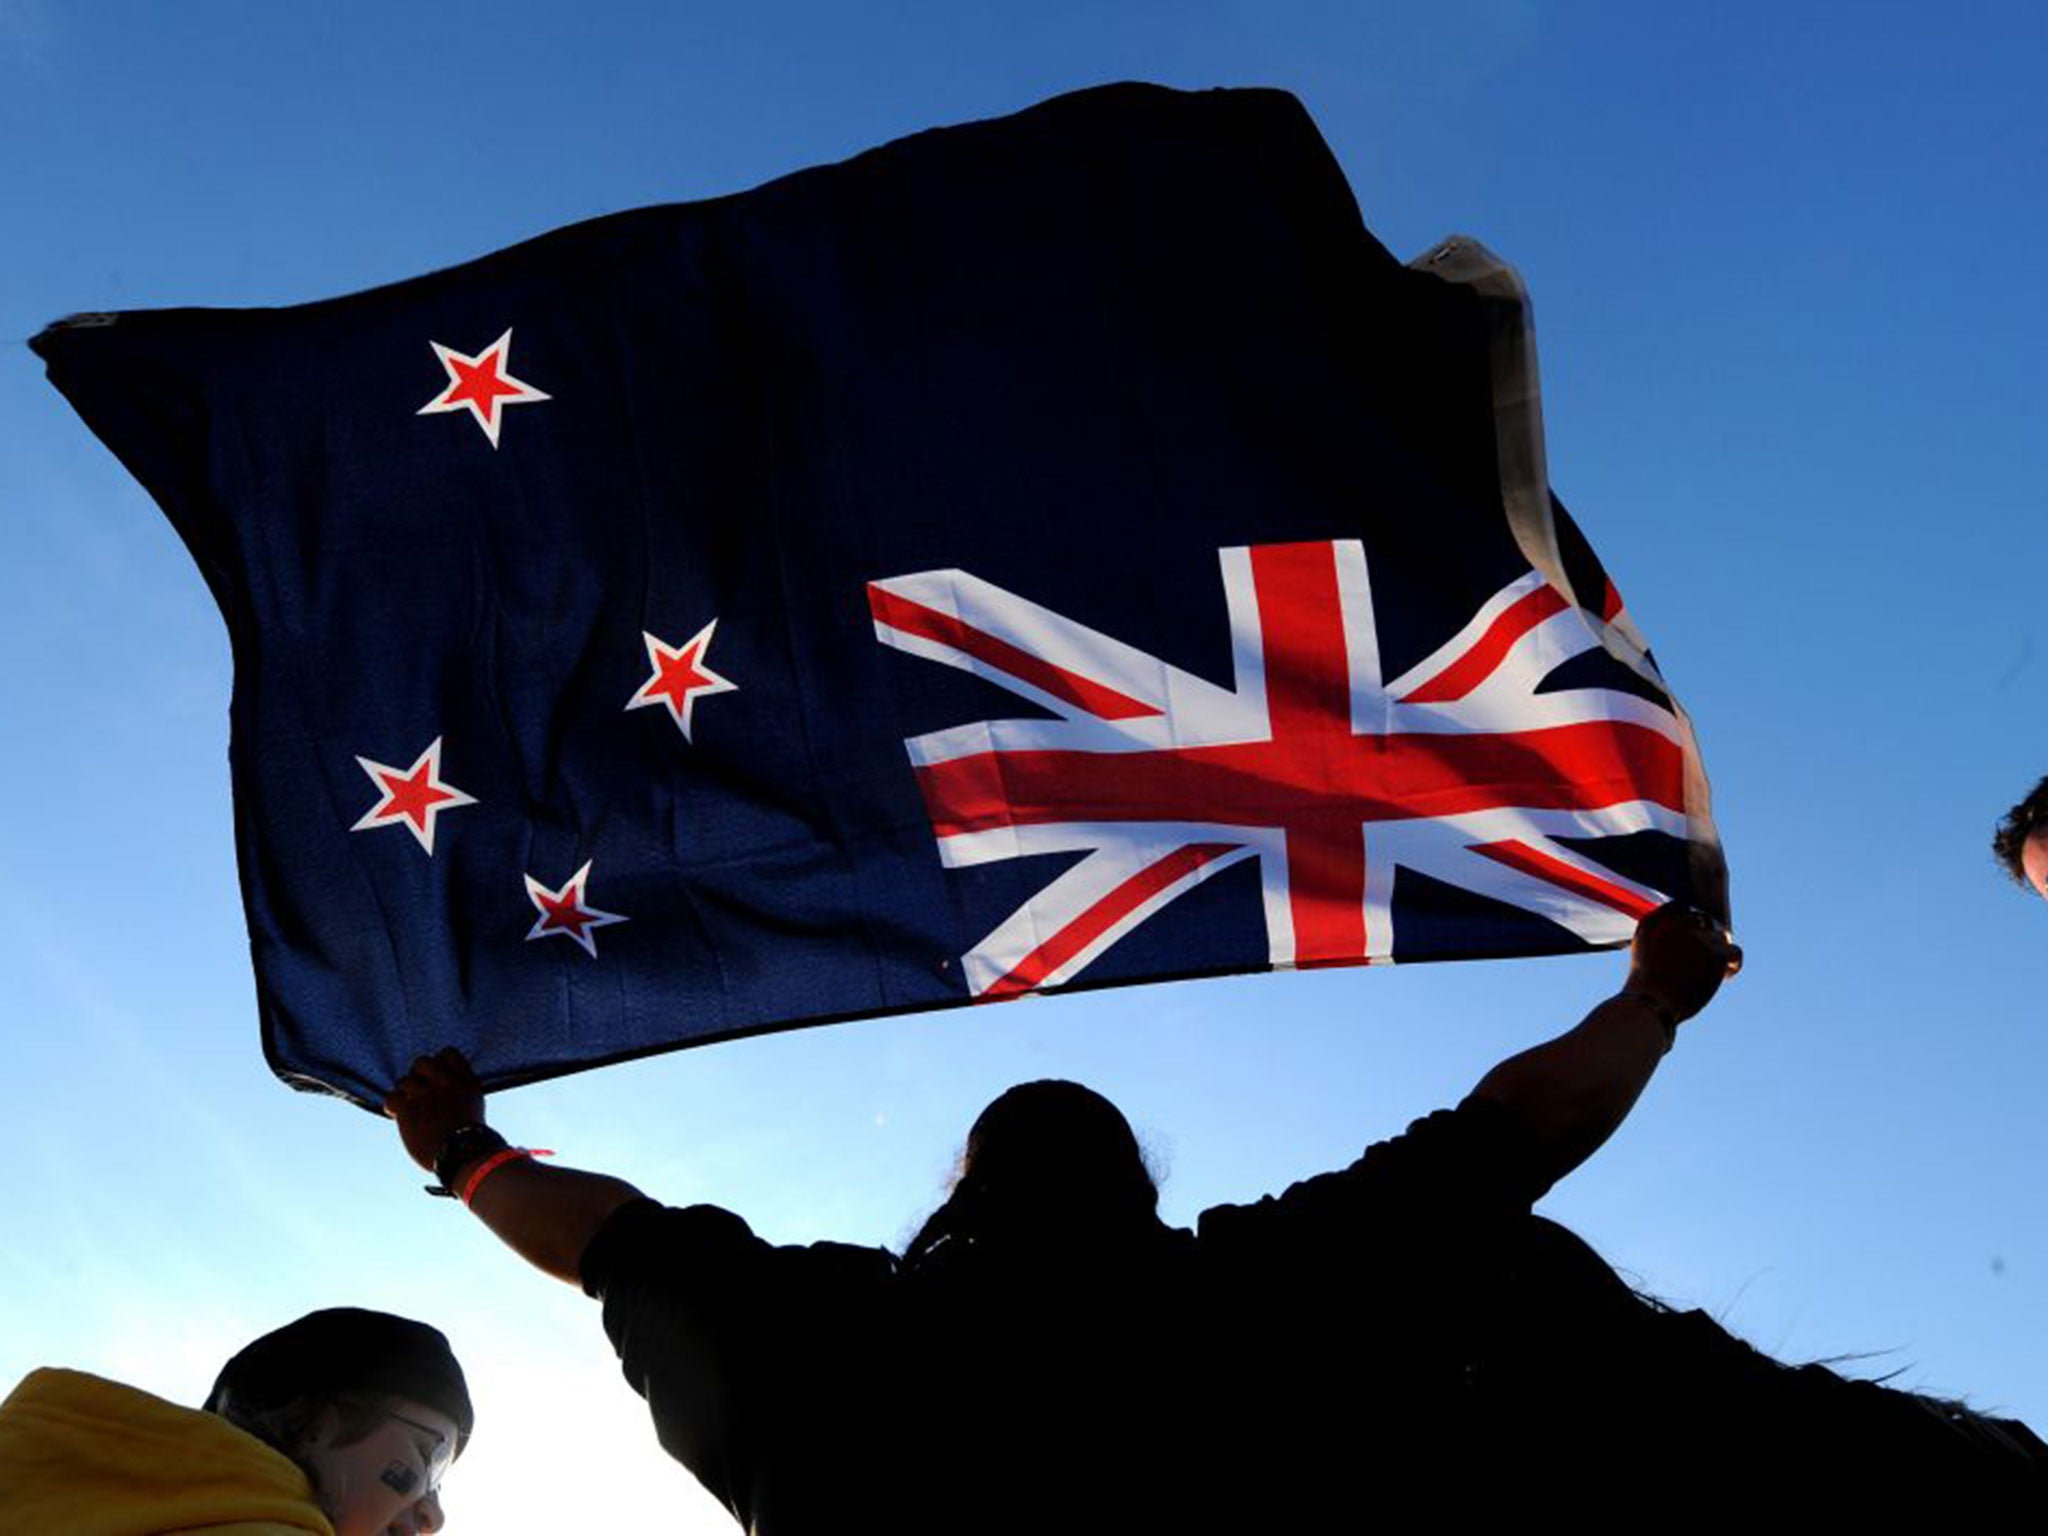 New Zealand’s flag is often confused with Australia’s; Prime Minister John Key wants it changed to a silver fern on a black background